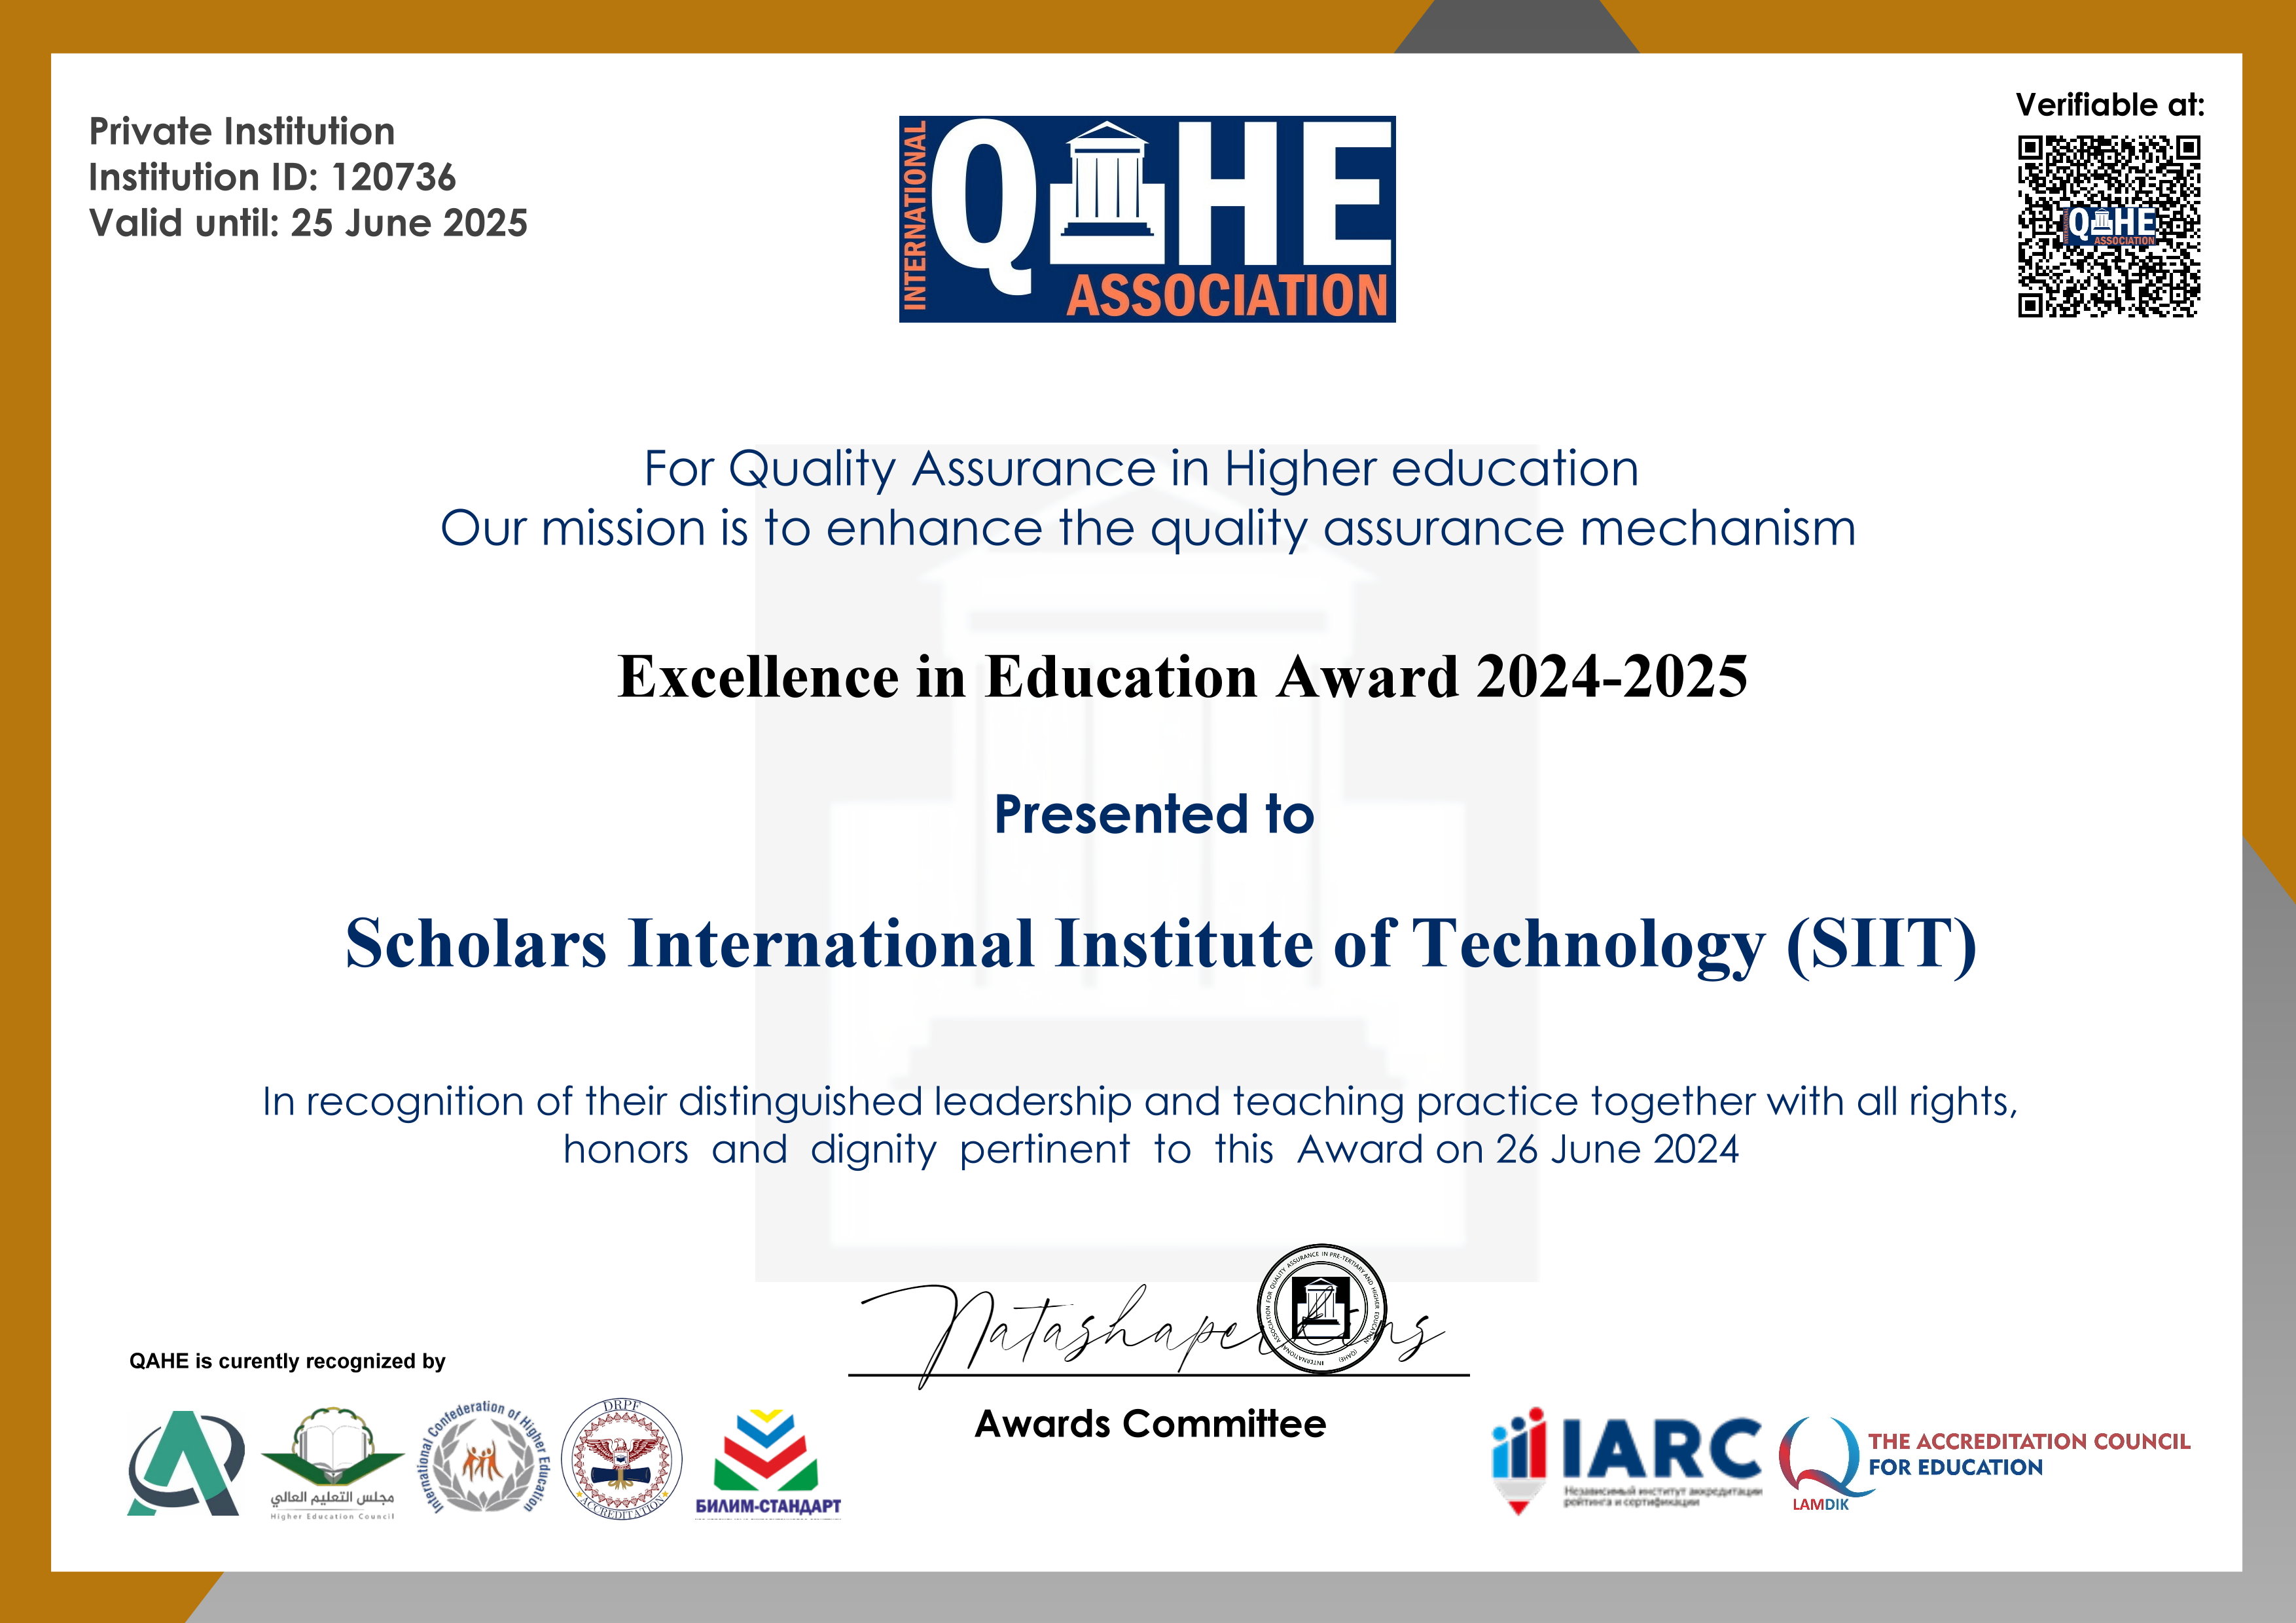 SIIT - Scholars International Institute Of Technology - Excellence in Education Awards 2024/2025